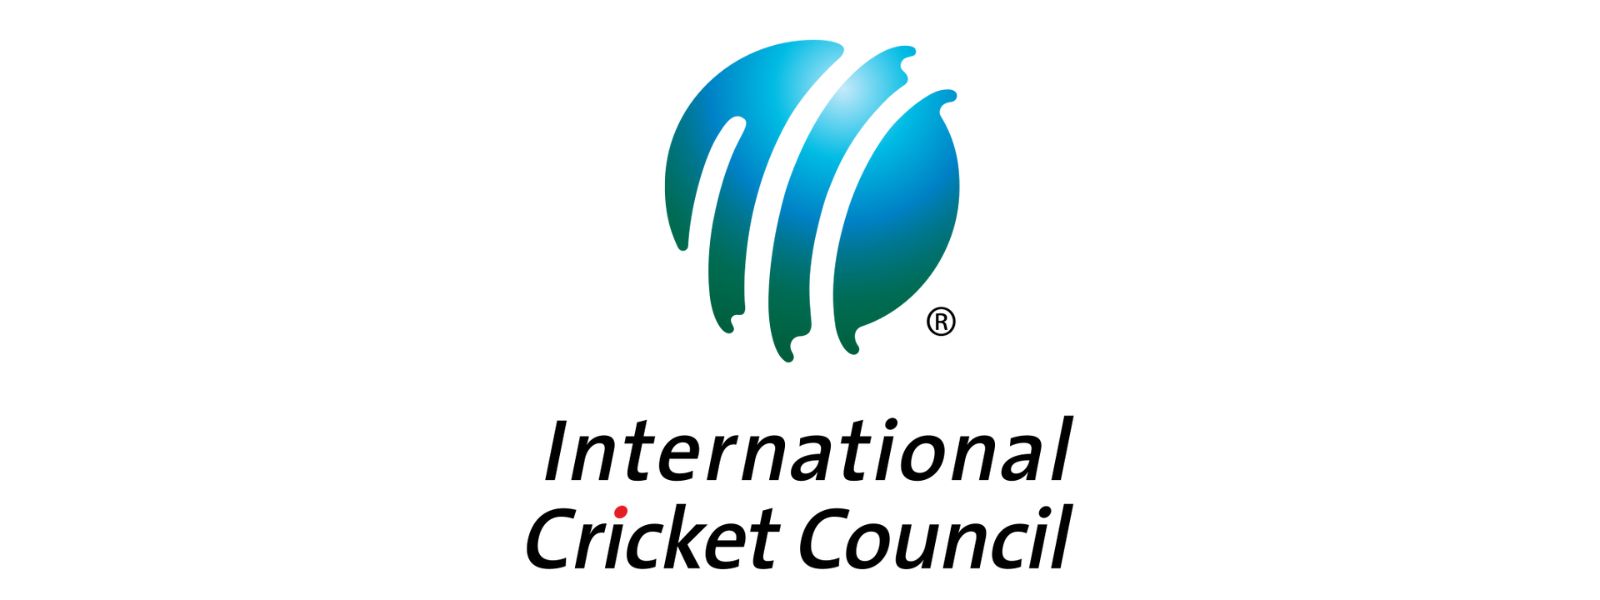 ICC and MTV inks historic agreement